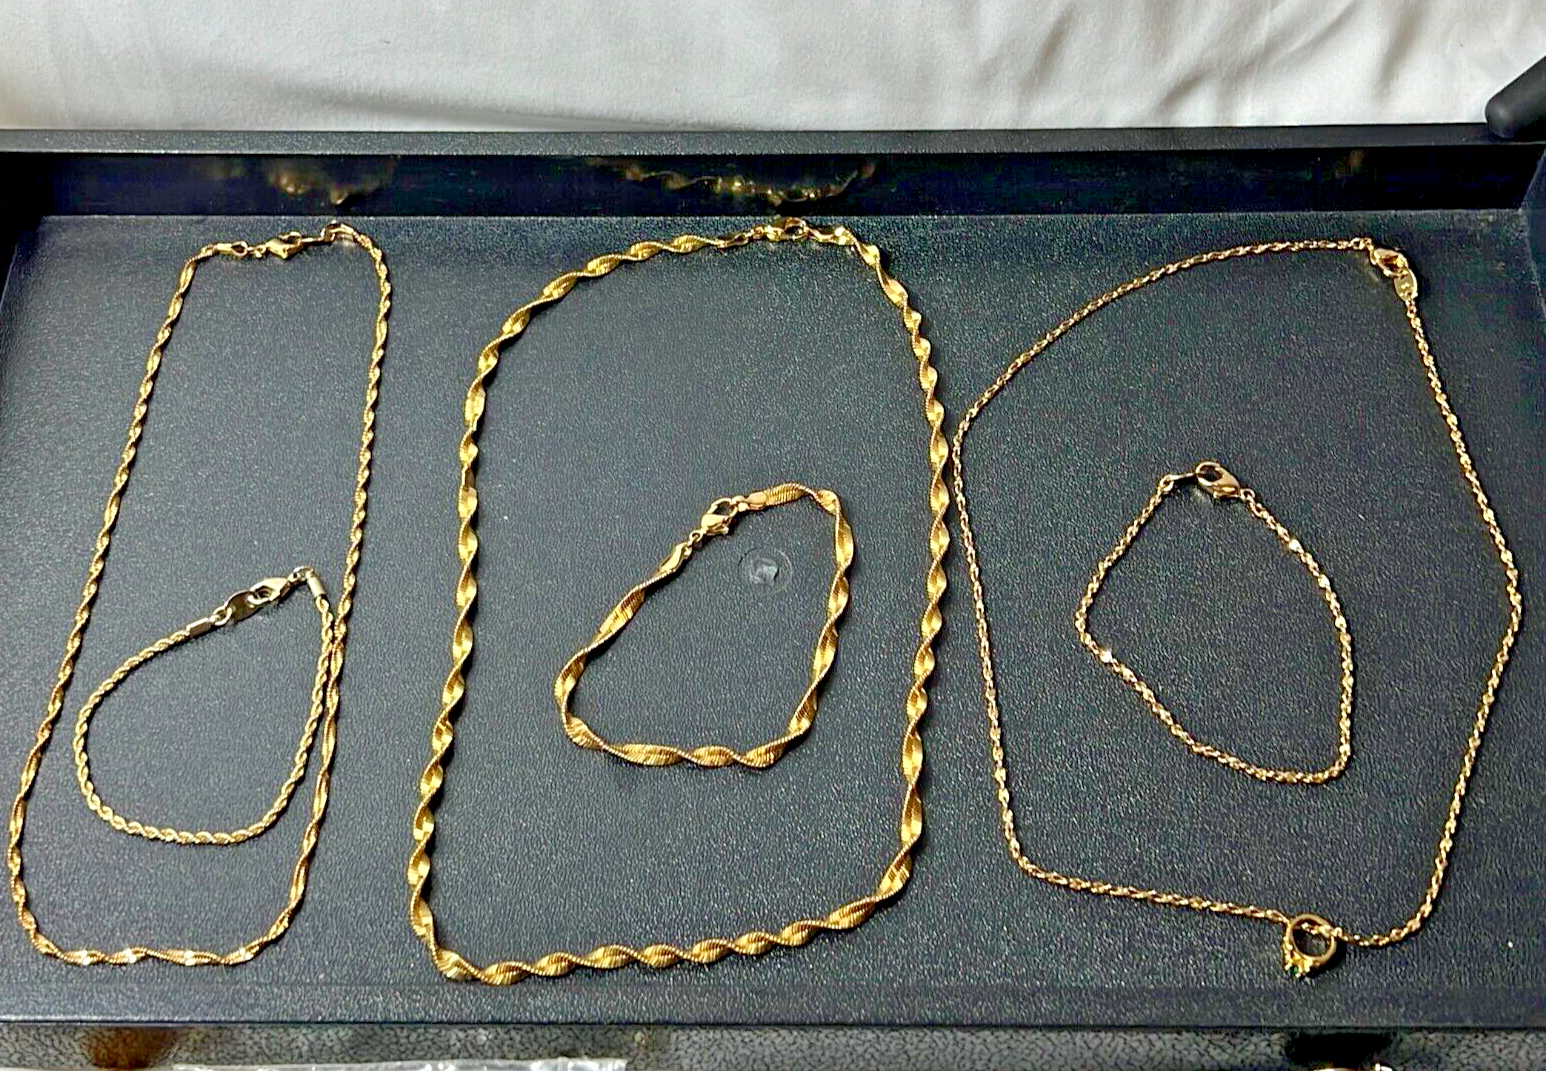 Lot Of Avon Gold Tone Twisted Chain Necklaces & Bracelets